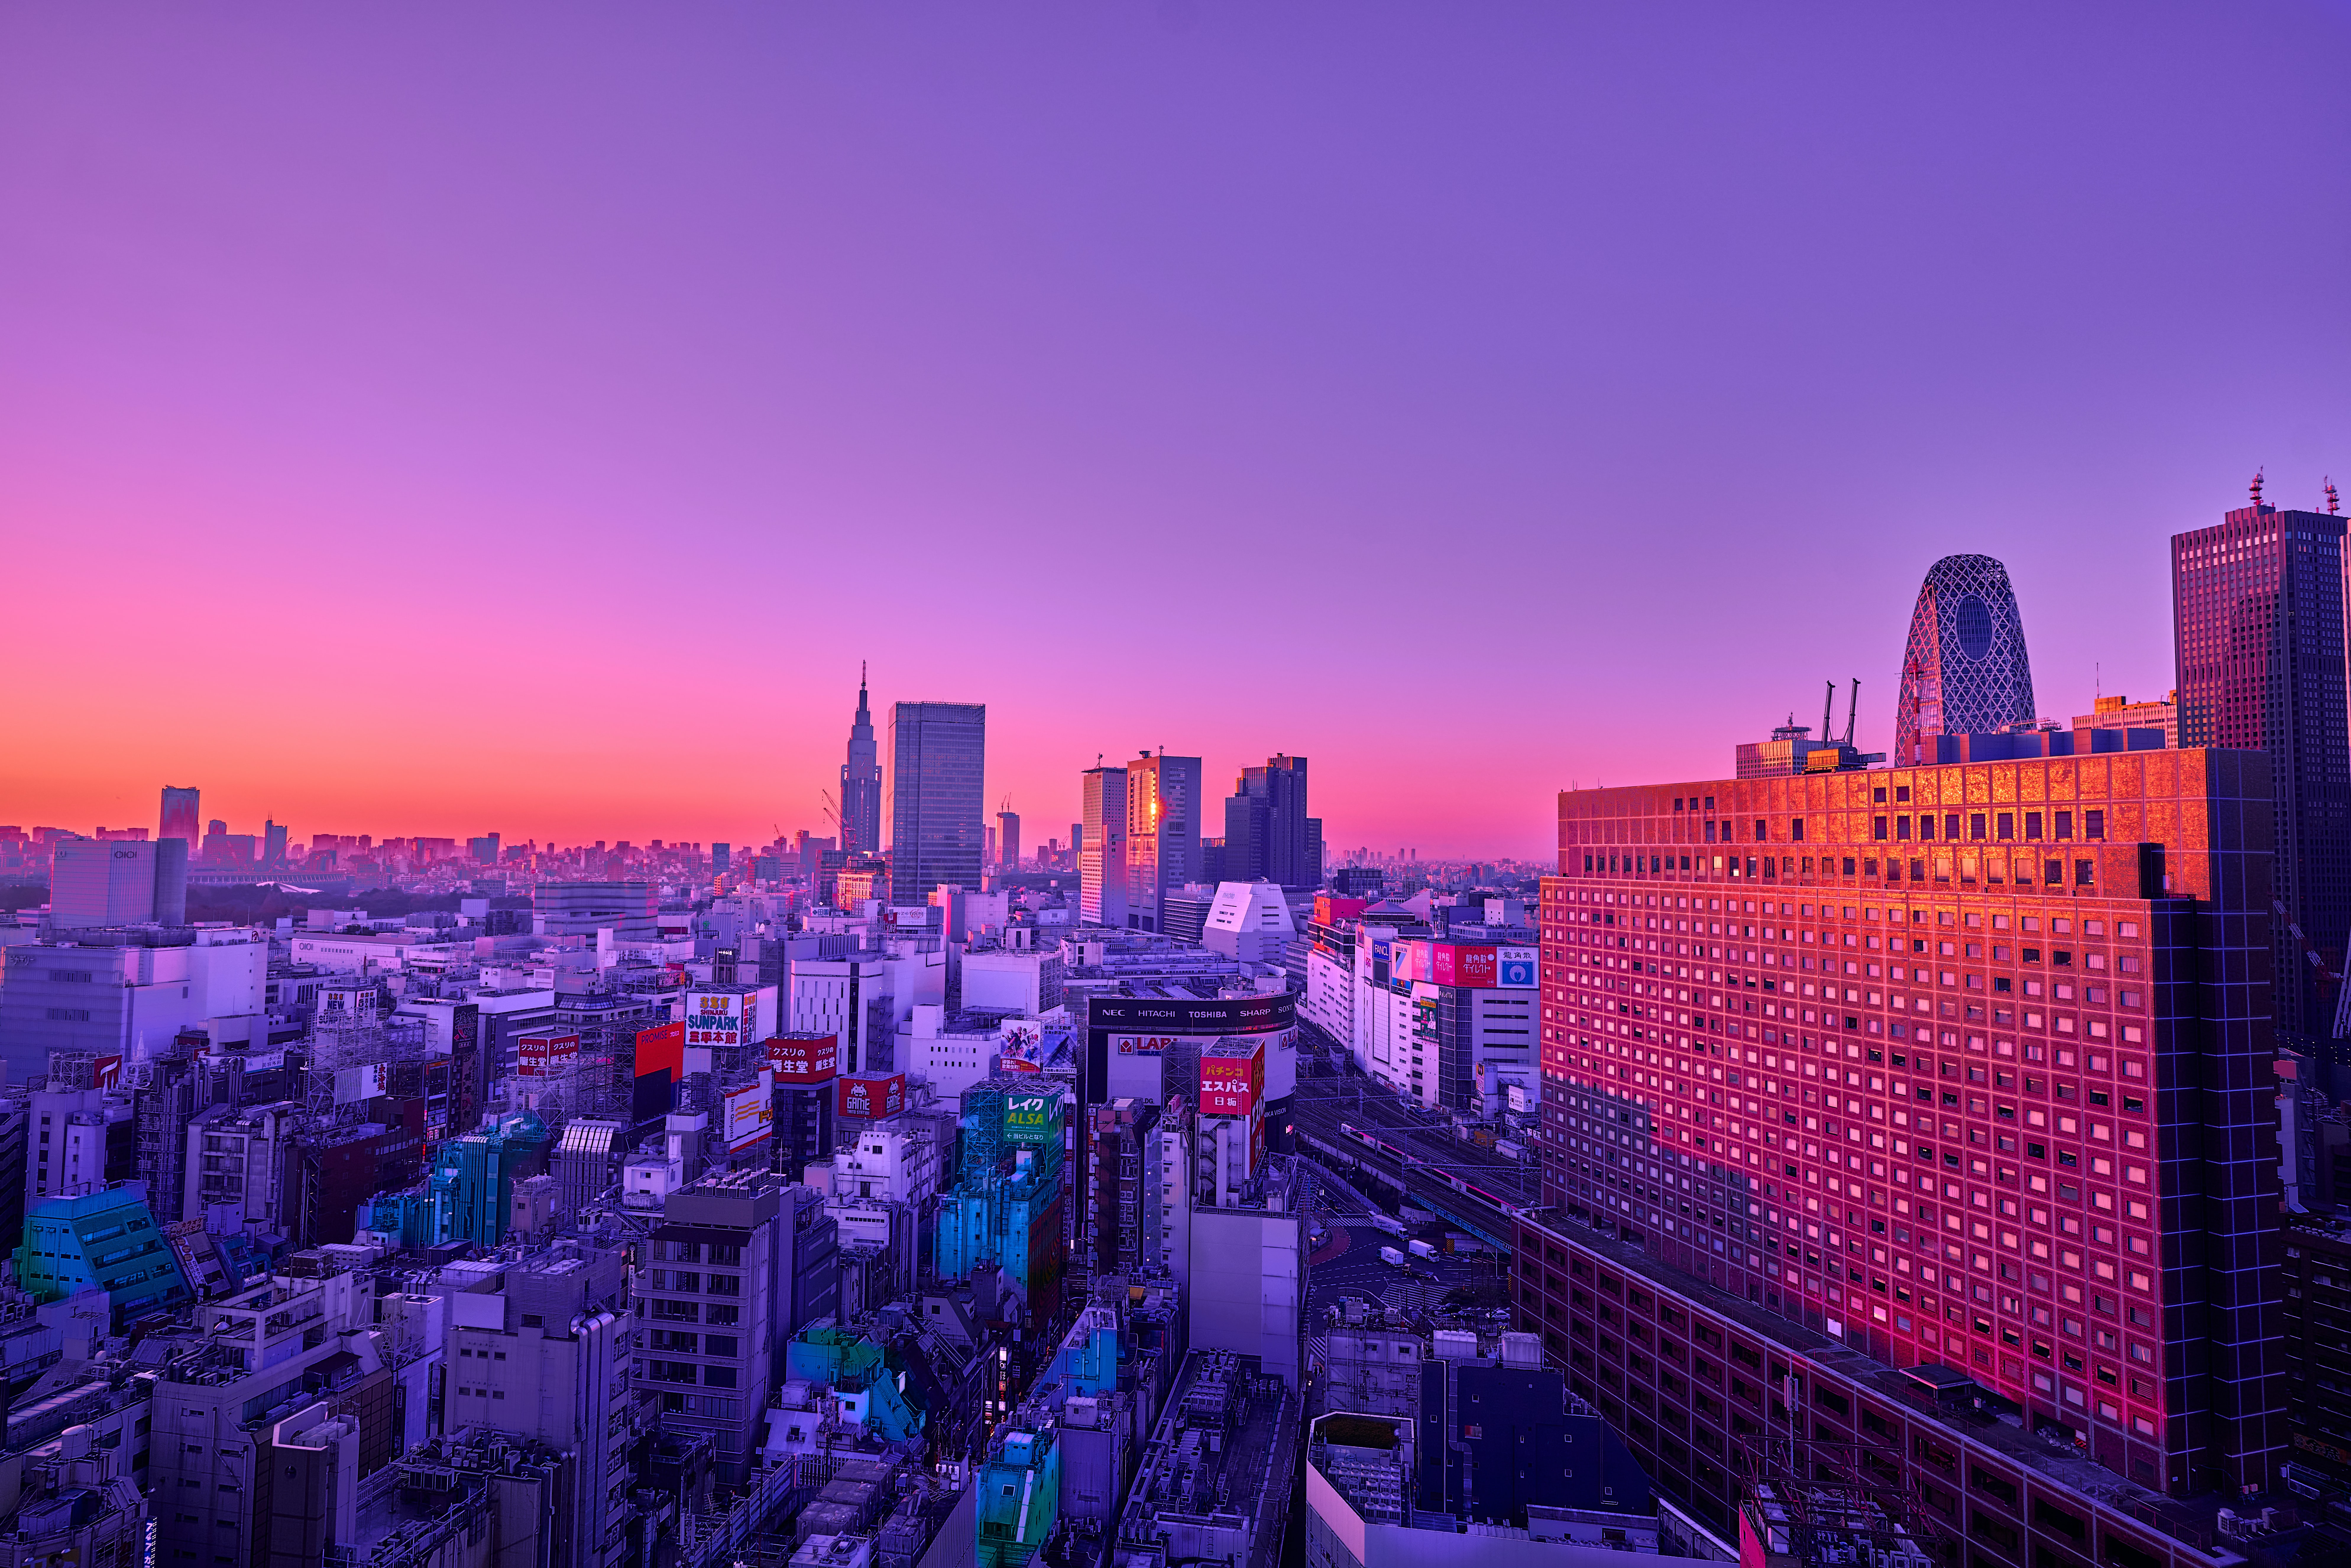 cities, twilight, violet, city, building, view from above, dusk, purple